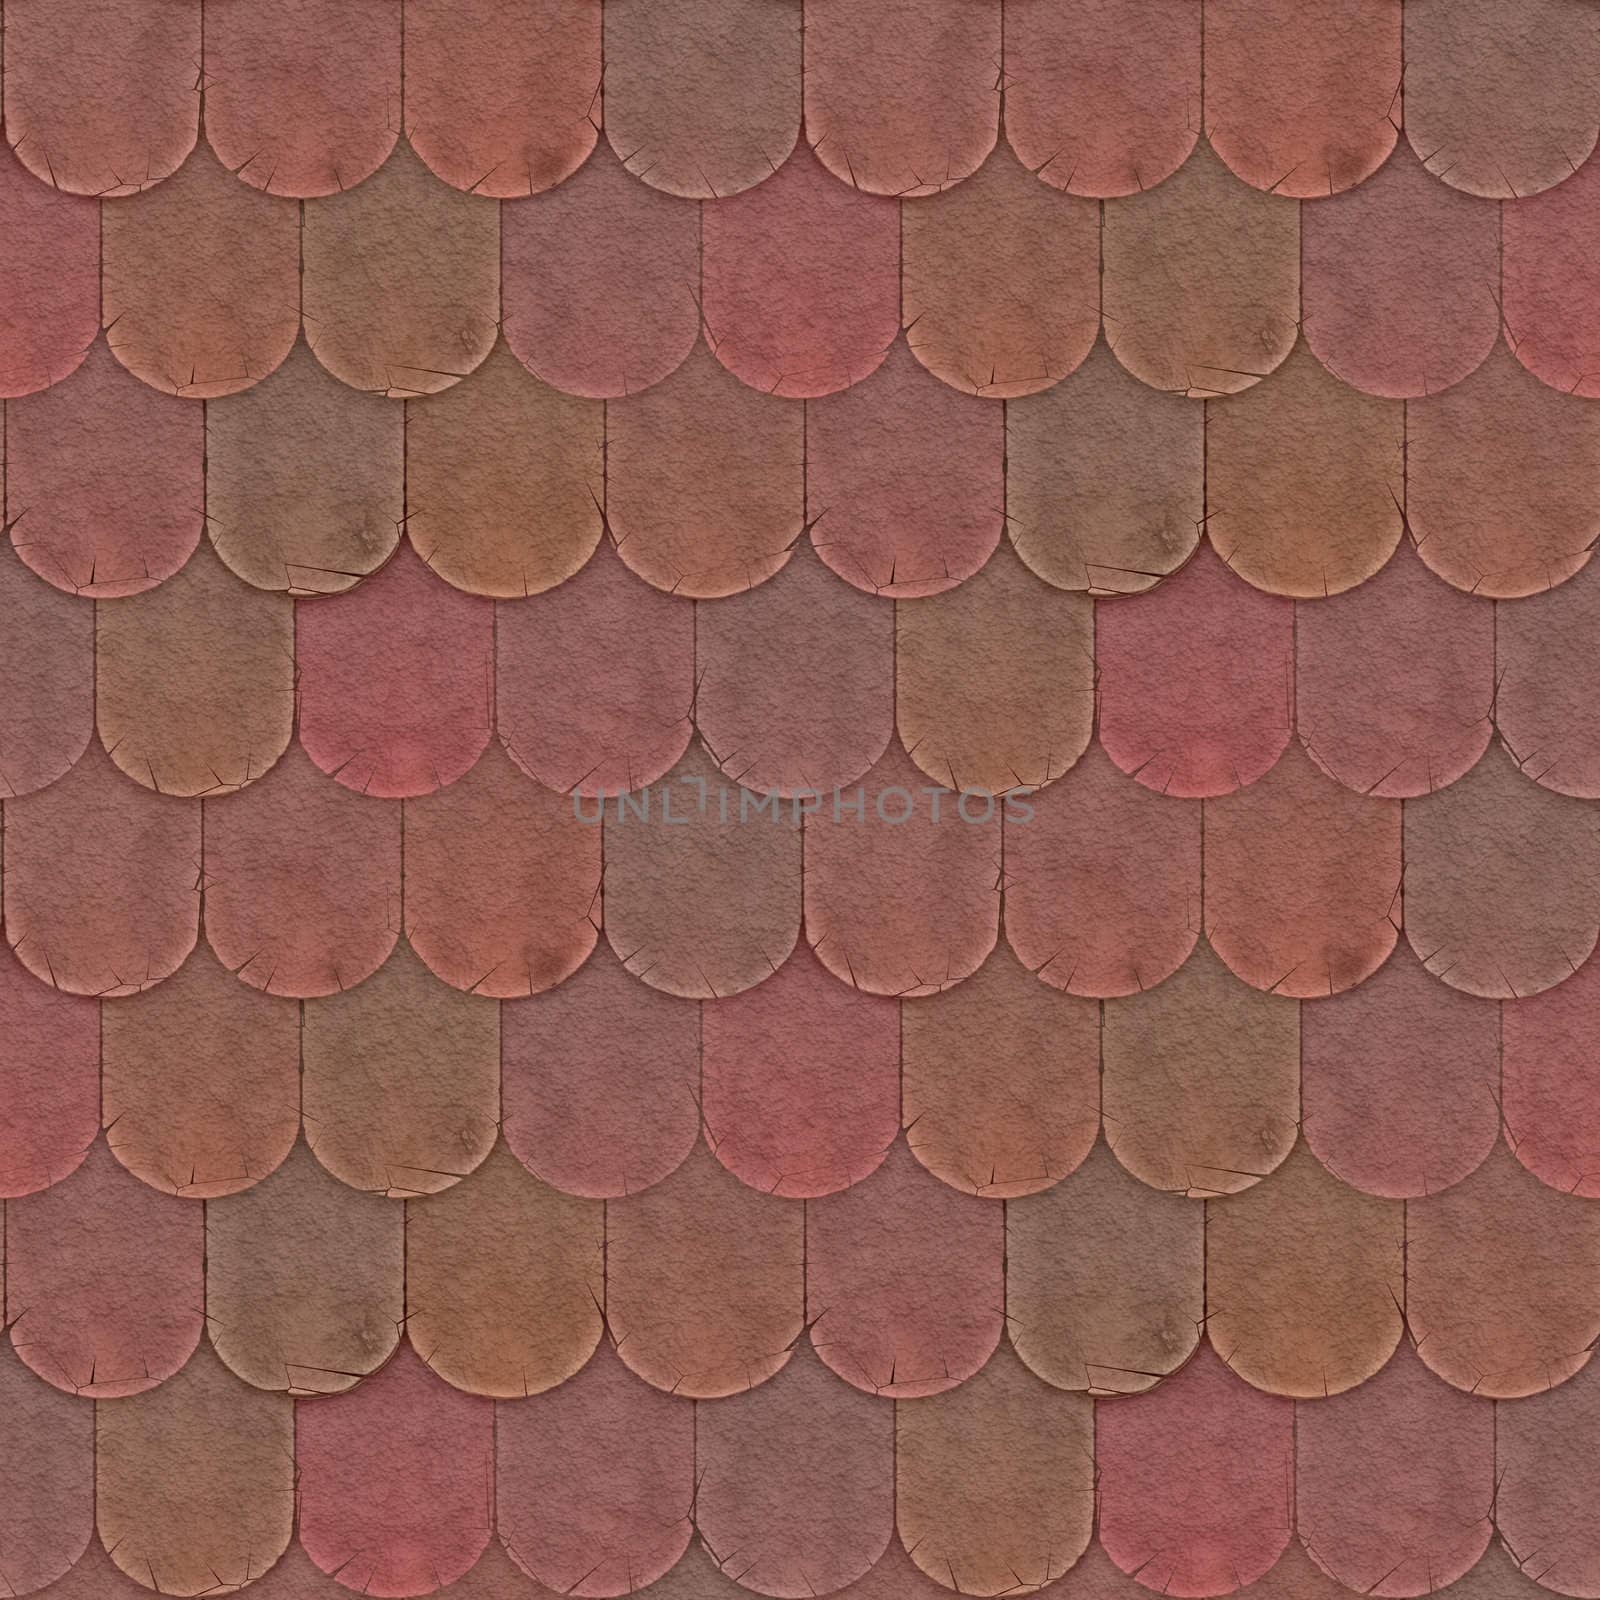 Realistic Rendering of Traditional Clay Tiles Seamless Pattern